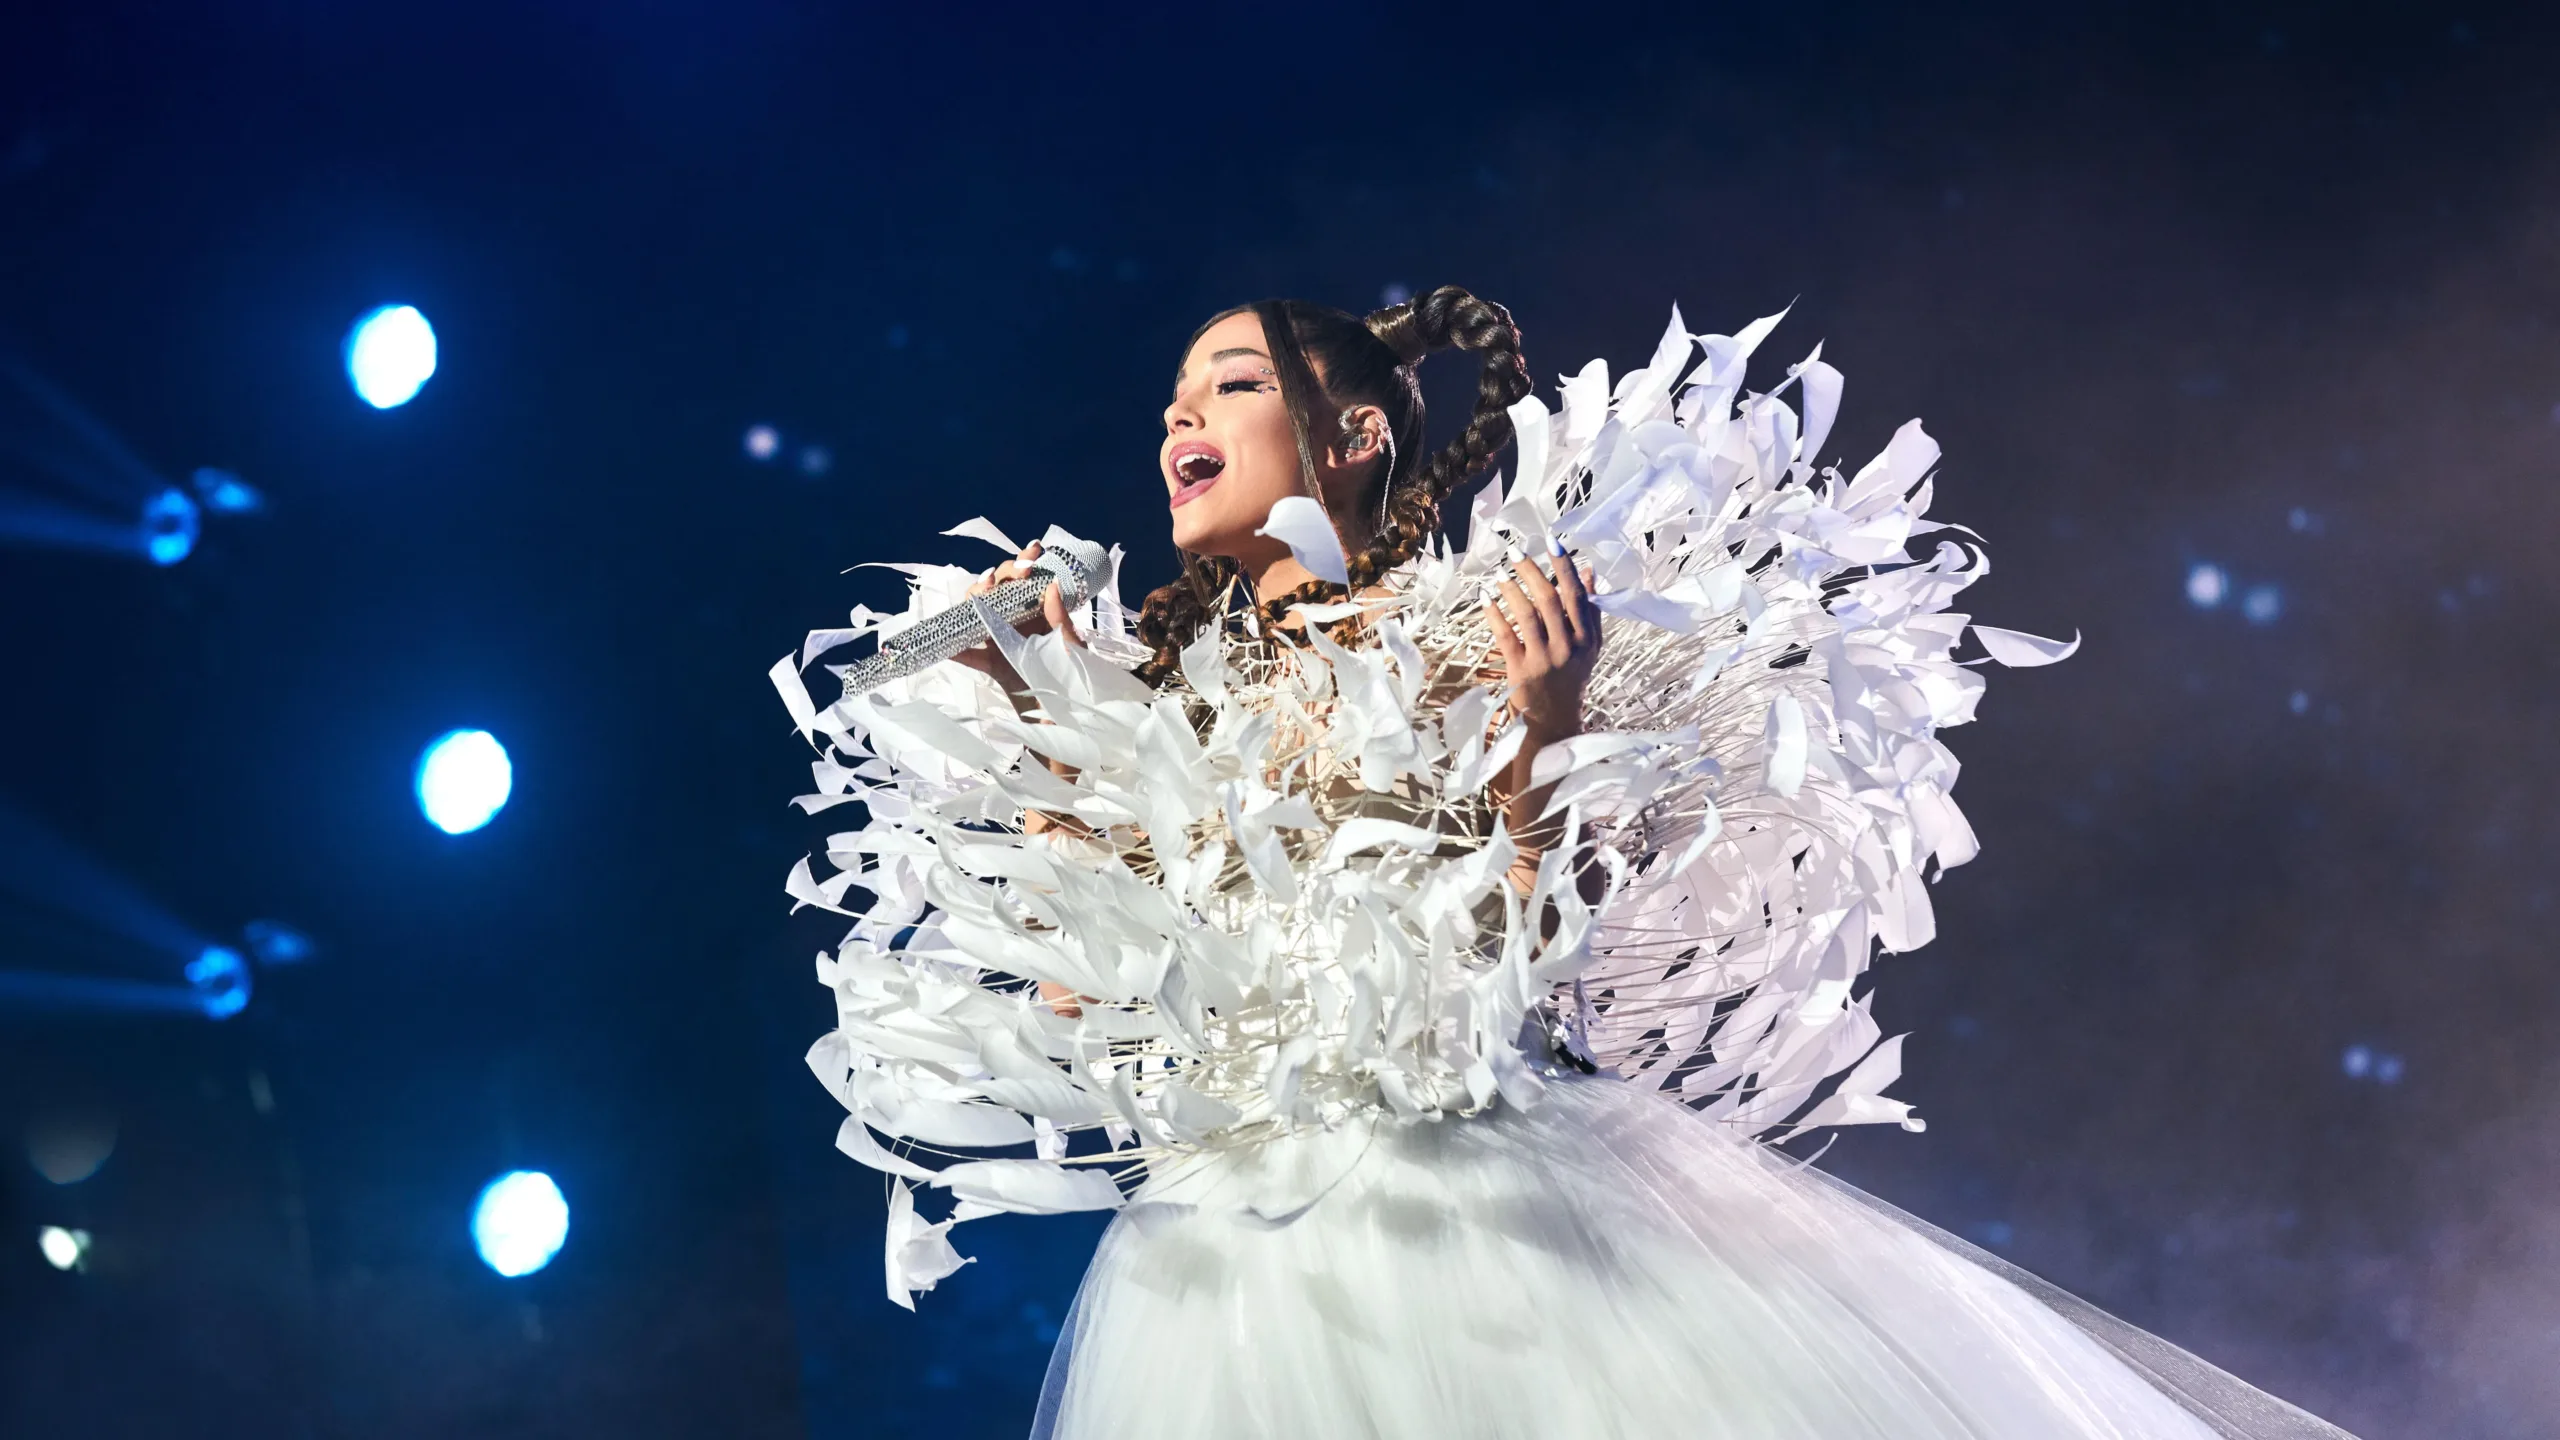 Ariana Grande sings on stage wearing white feathered outfit